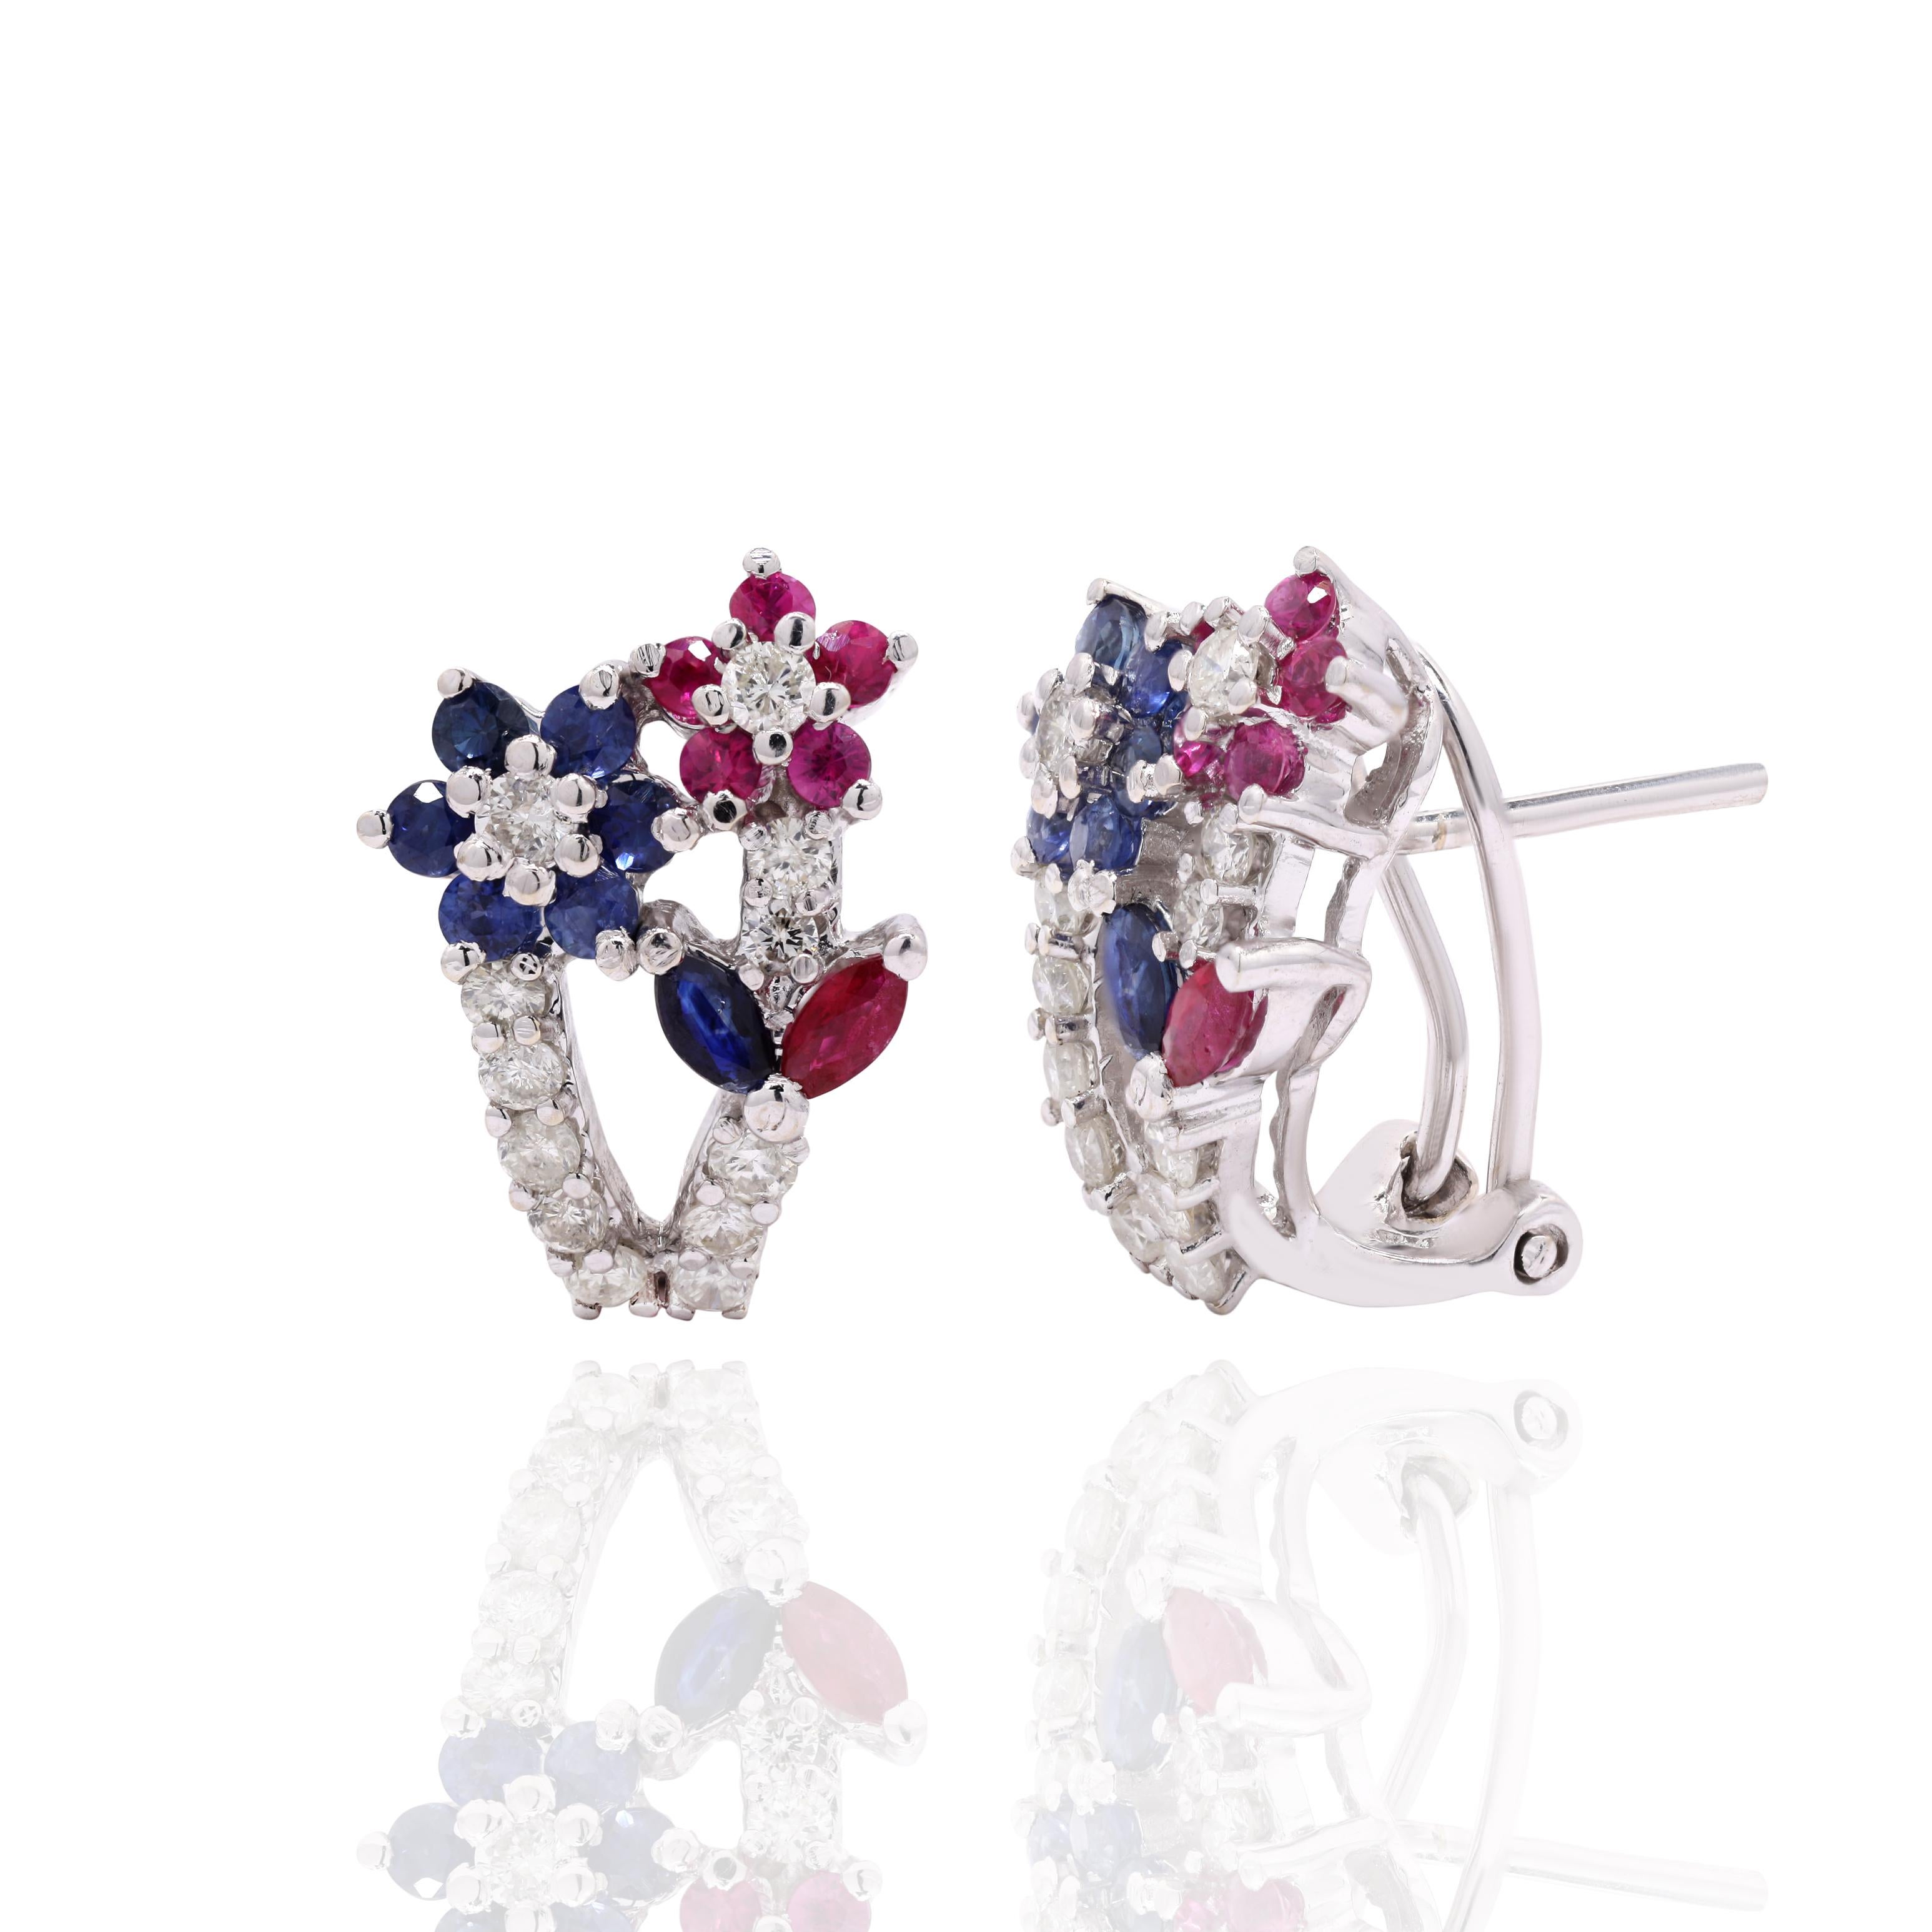 Studs create a subtle beauty while showcasing the colors of the natural precious gemstones and illuminating diamonds making a statement.
Round cut ruby and sapphire studs with diamonds in 18K gold. Embrace your look with these stunning pair of